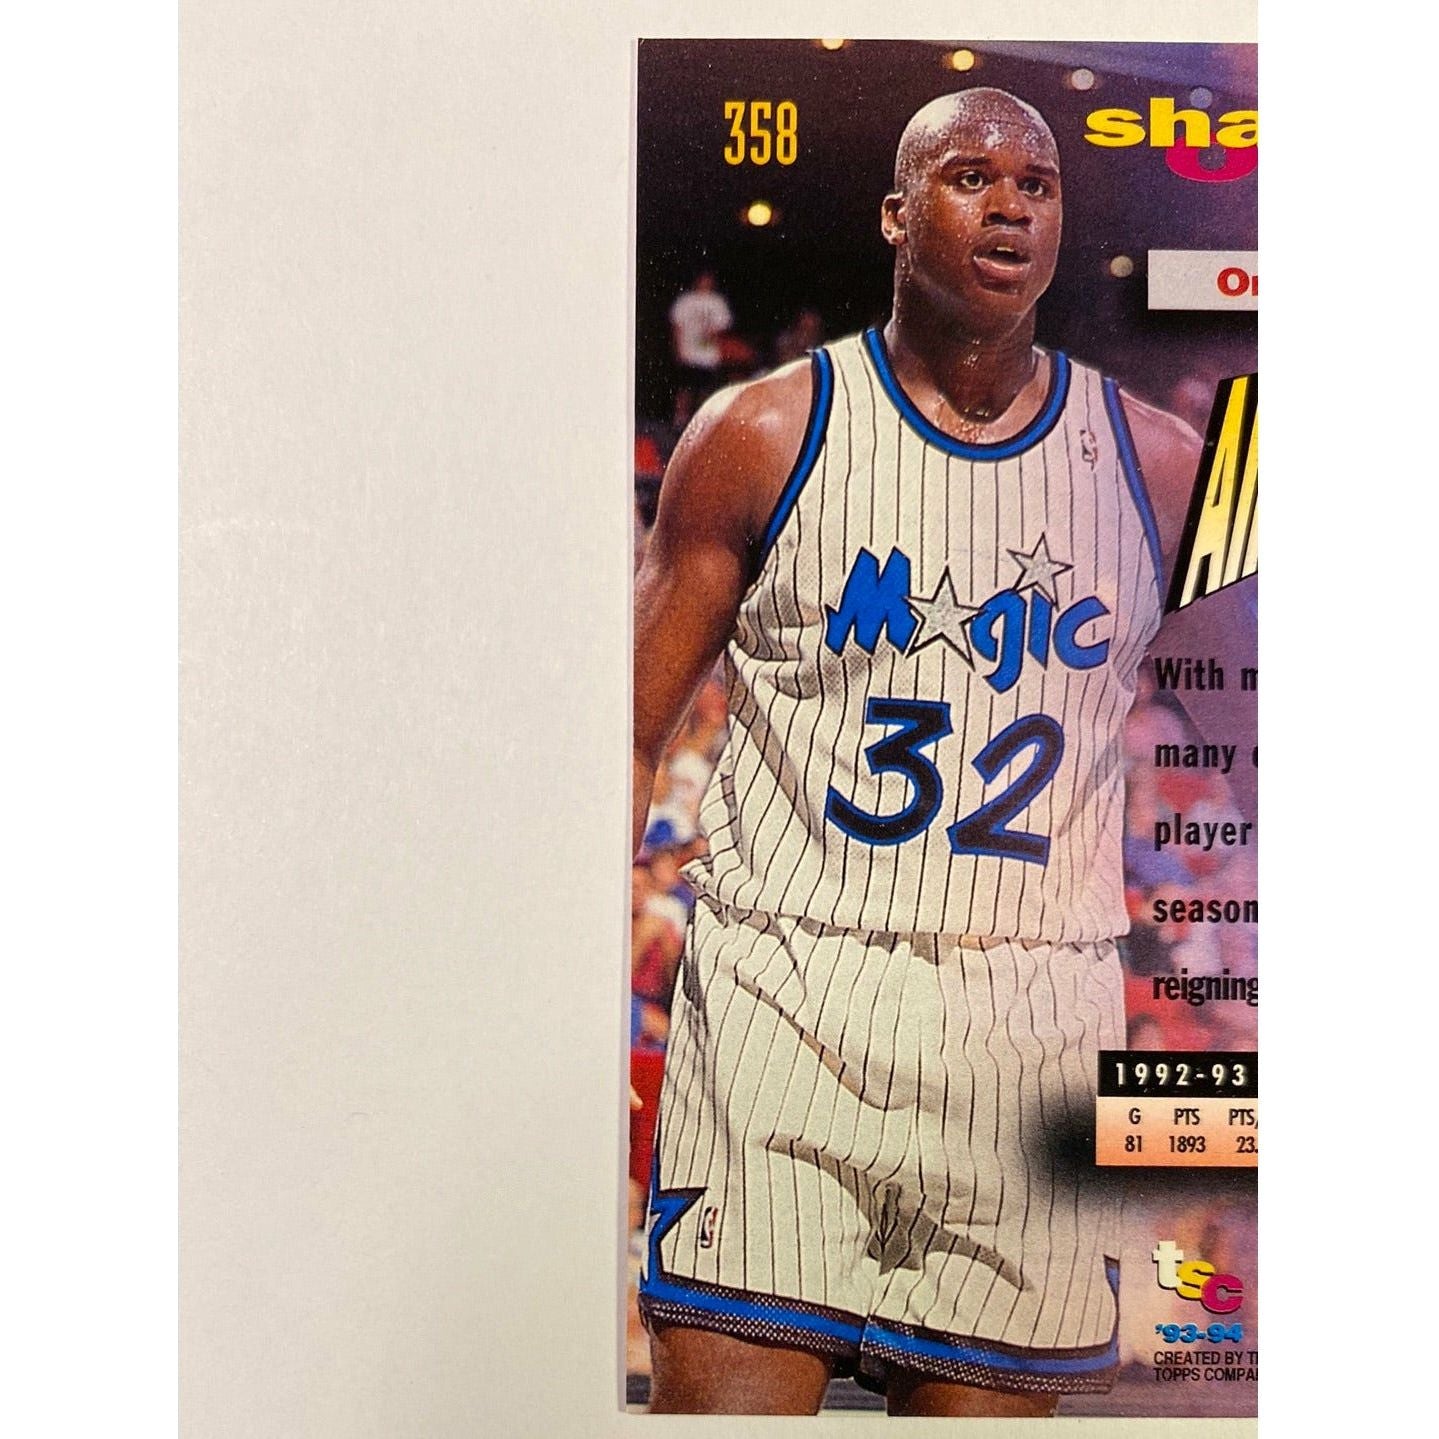 1993-94 Topps Stadium Club Shaquille O’Neal Frequent Flyers